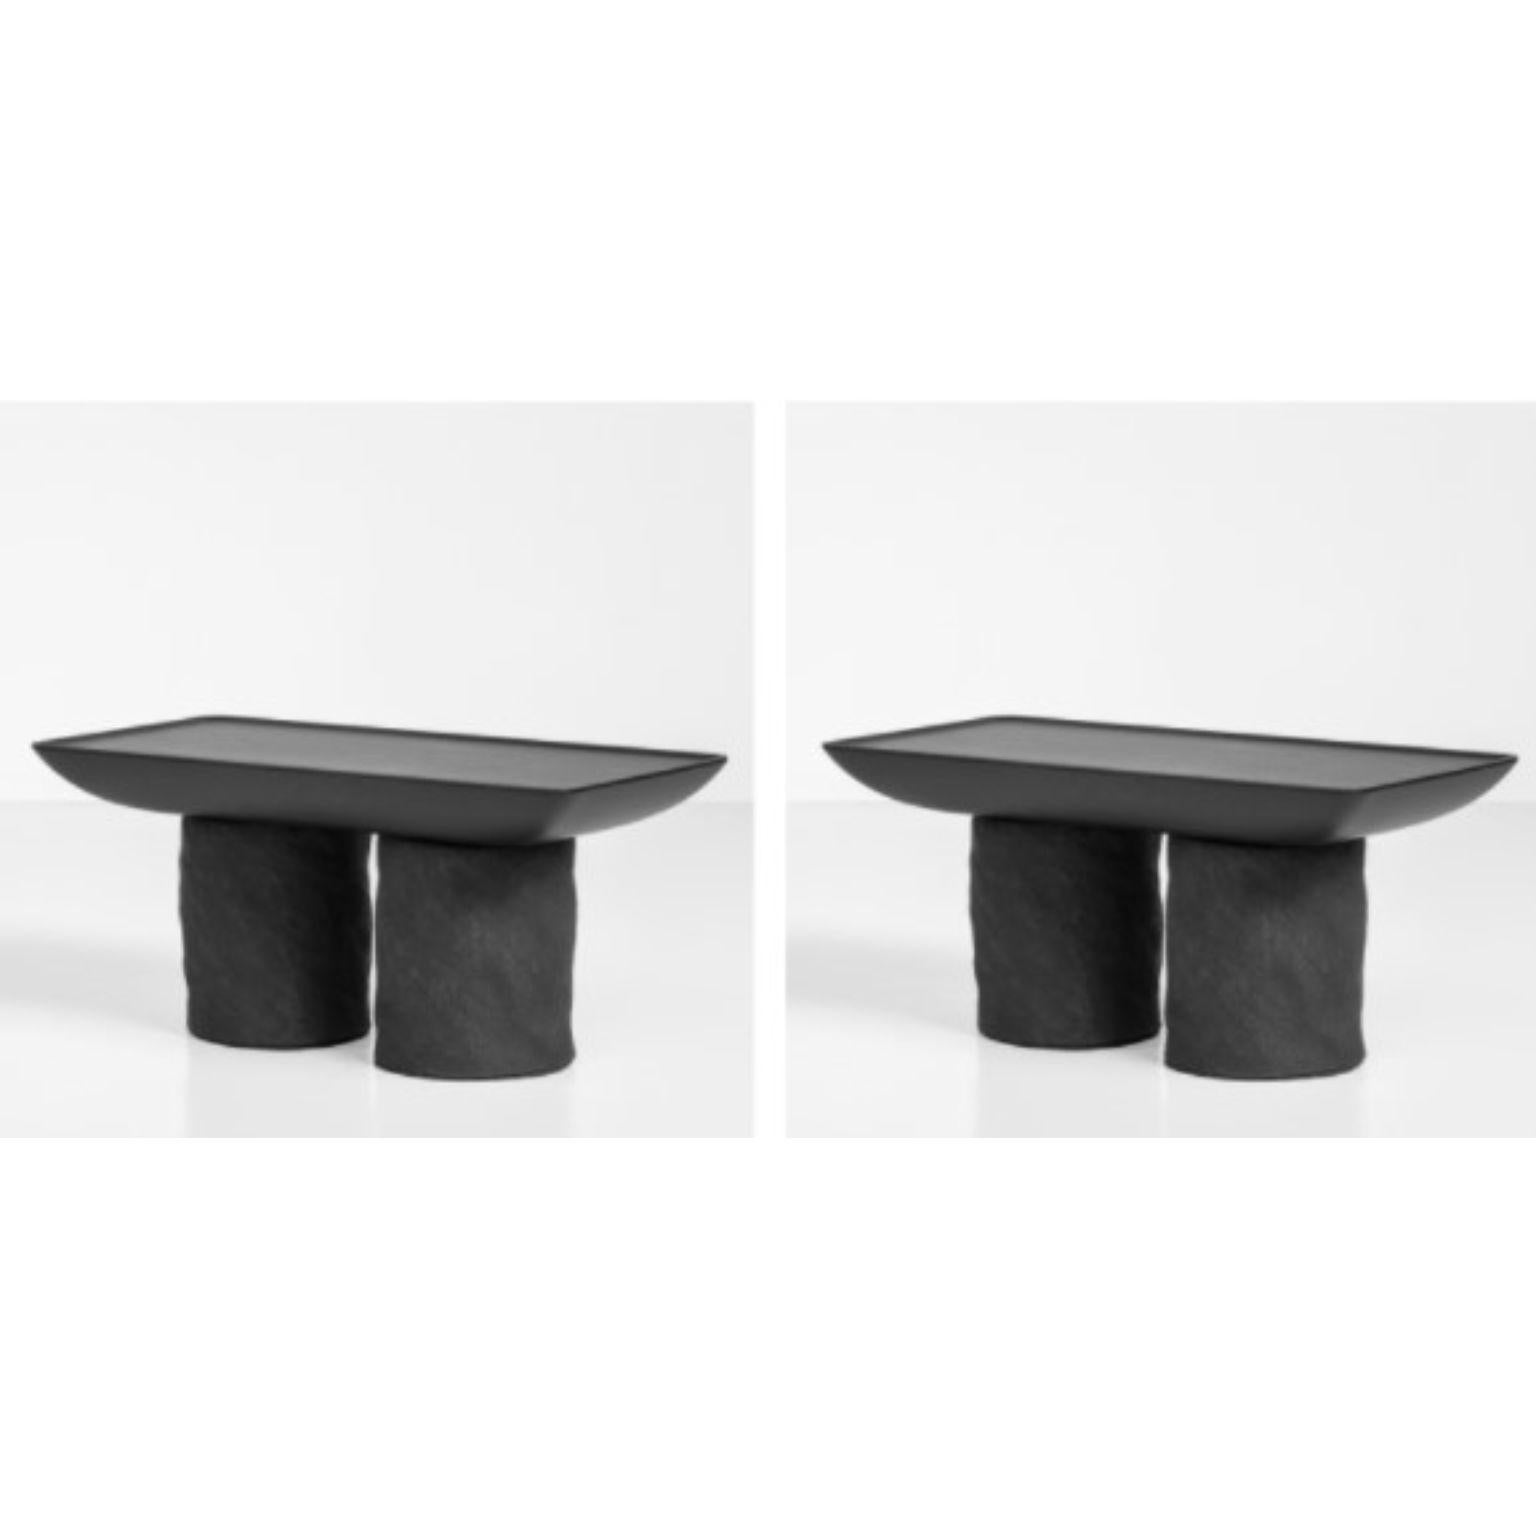 Set of 2 Korotun coffee tables by Faina
Design: Victoriya Yakusha
Materials: Clay, Wood
Dimensions: W 75 x D 42 x H 35 cm

Almost carved in stone, minimalist coffee table with sharp outlines has sturdy character. With its authentic features KOROTUN